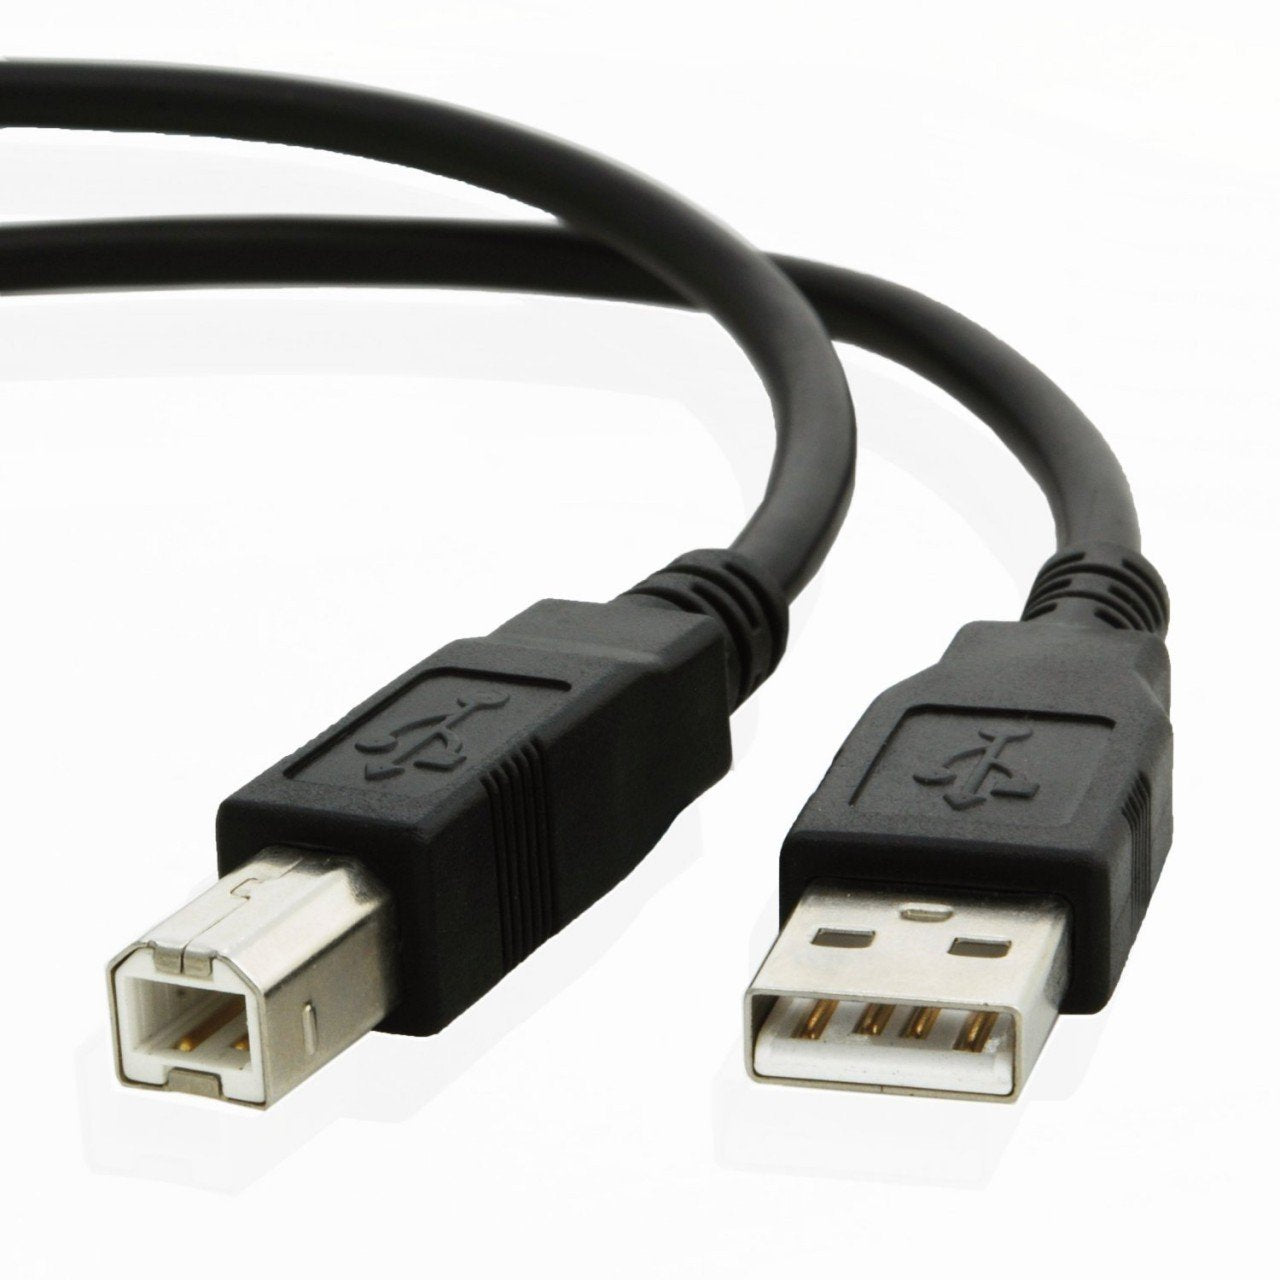 USB cable for Casio KEYBOARD CTK-7000